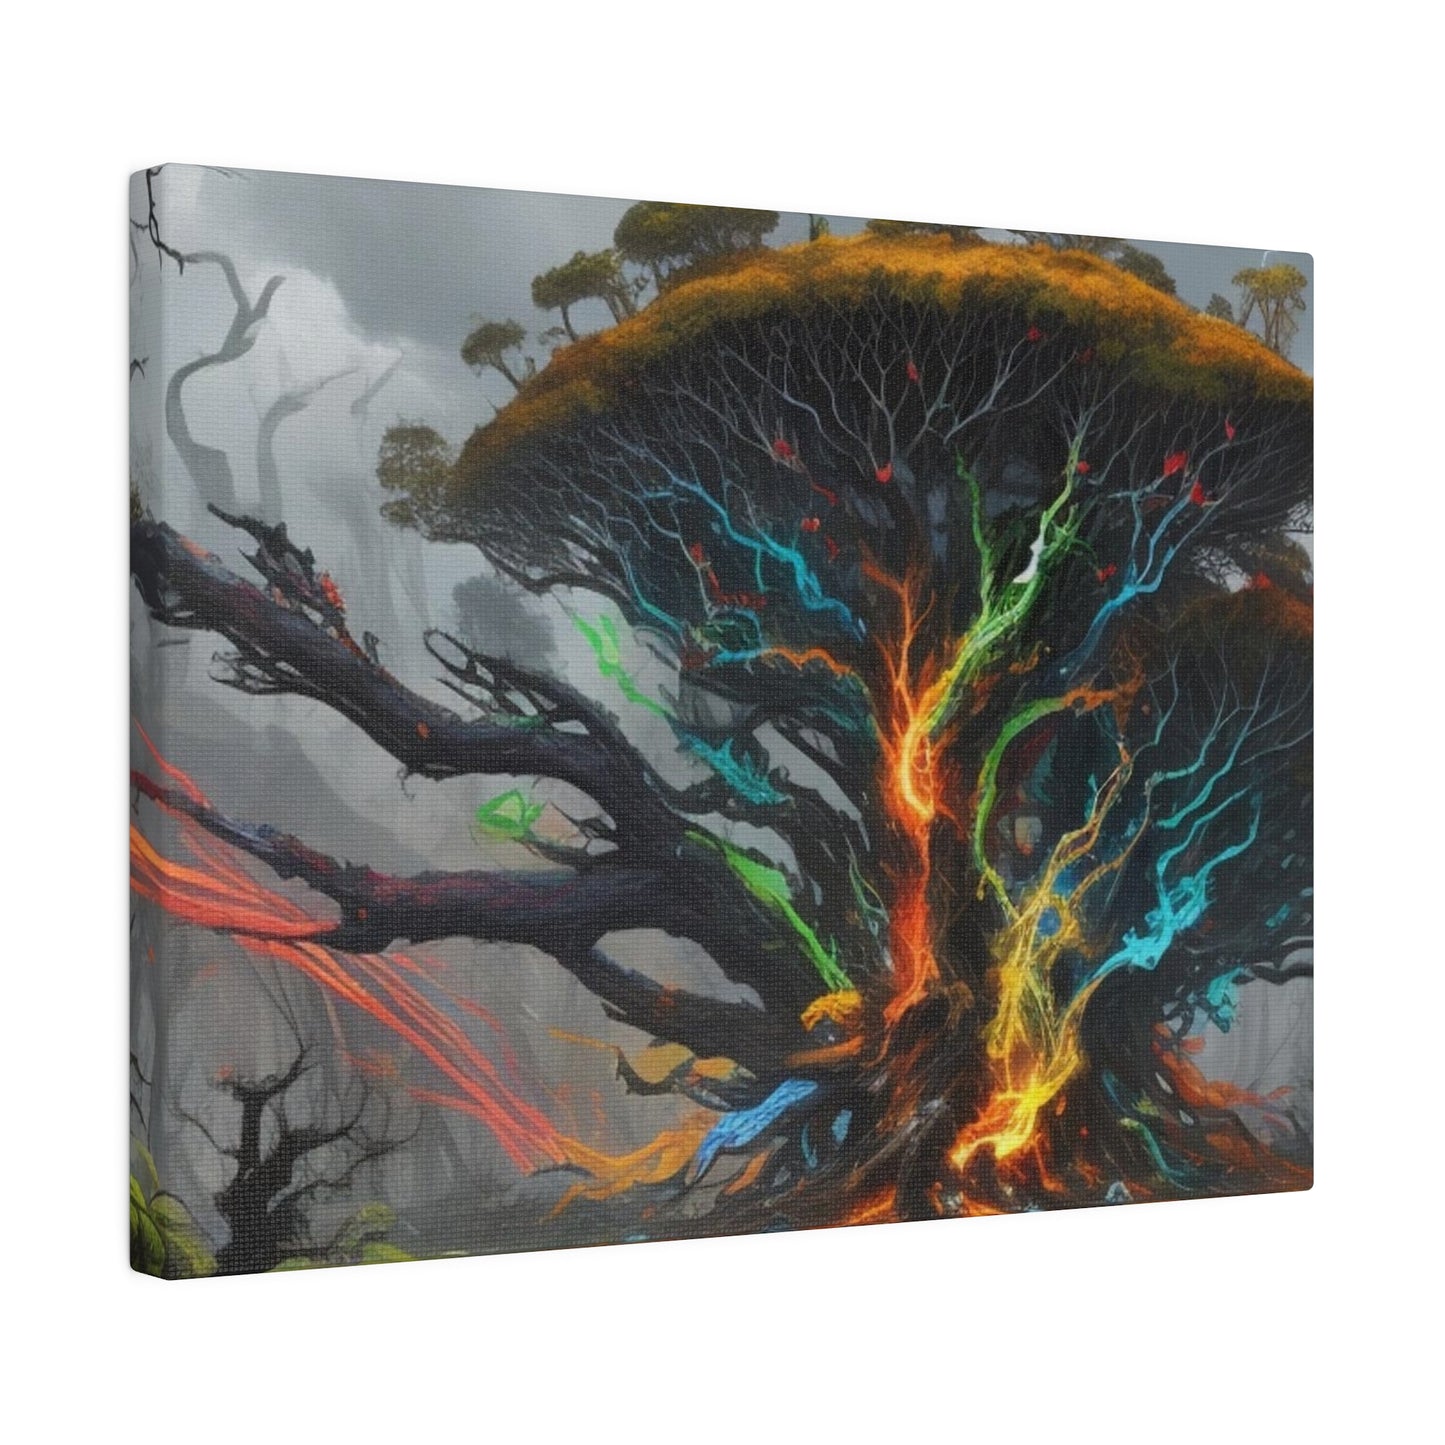 Colourful Lightning Bolts Among Large Trees - Matte Canvas, Stretched, 0.75"